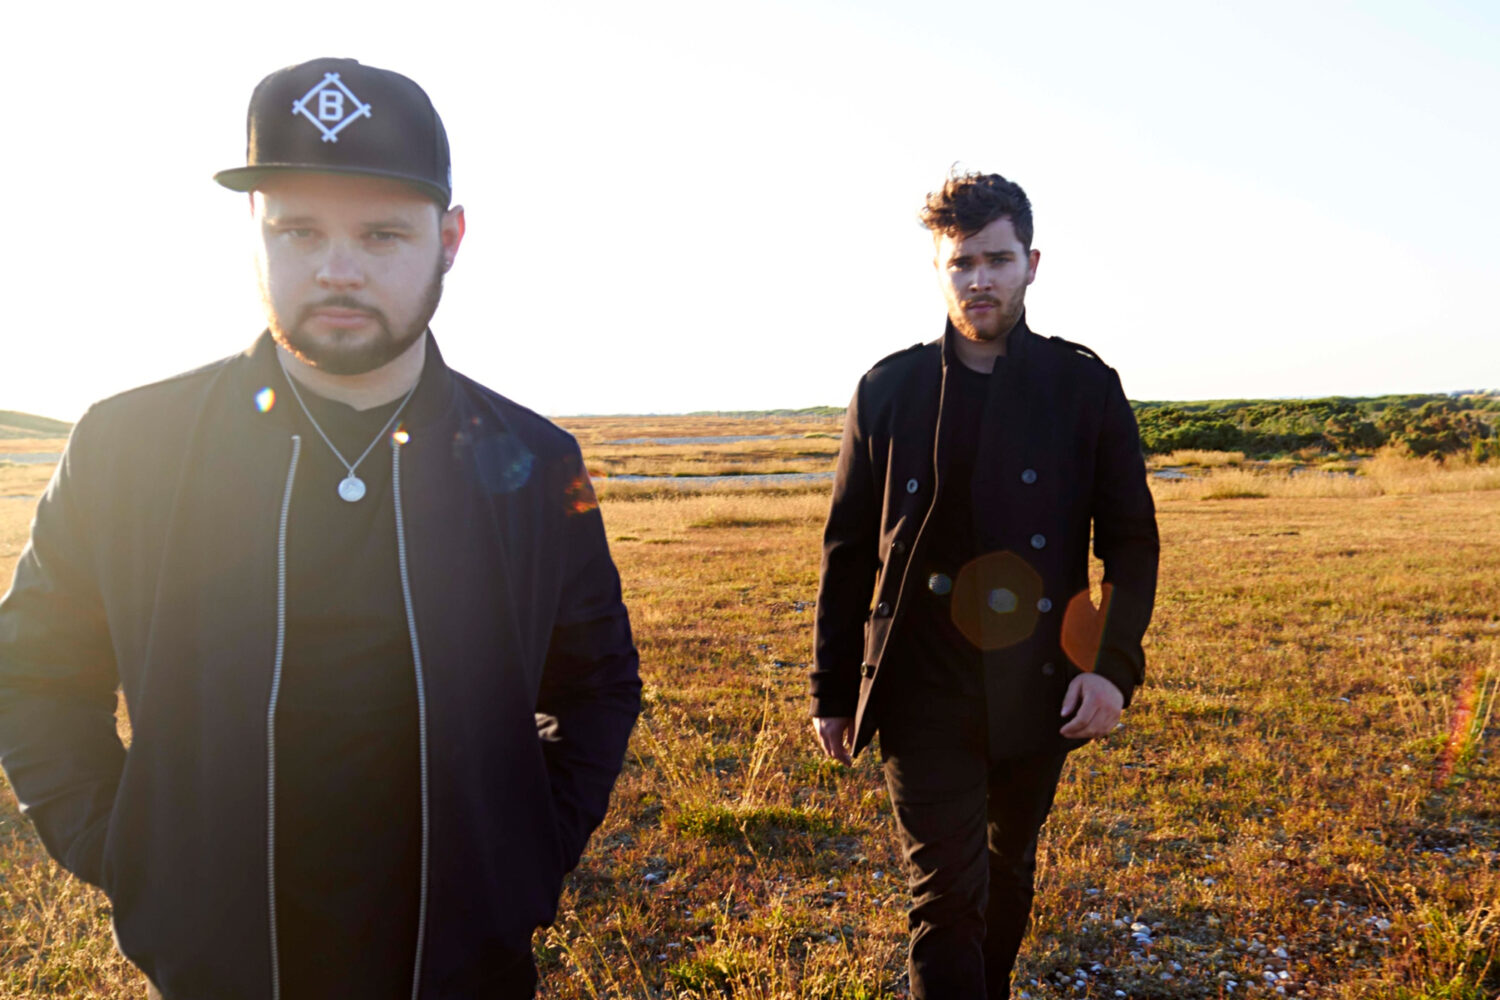 Reading 2015 continues with Royal Blood, Wolf Alice, Charli XCX & more